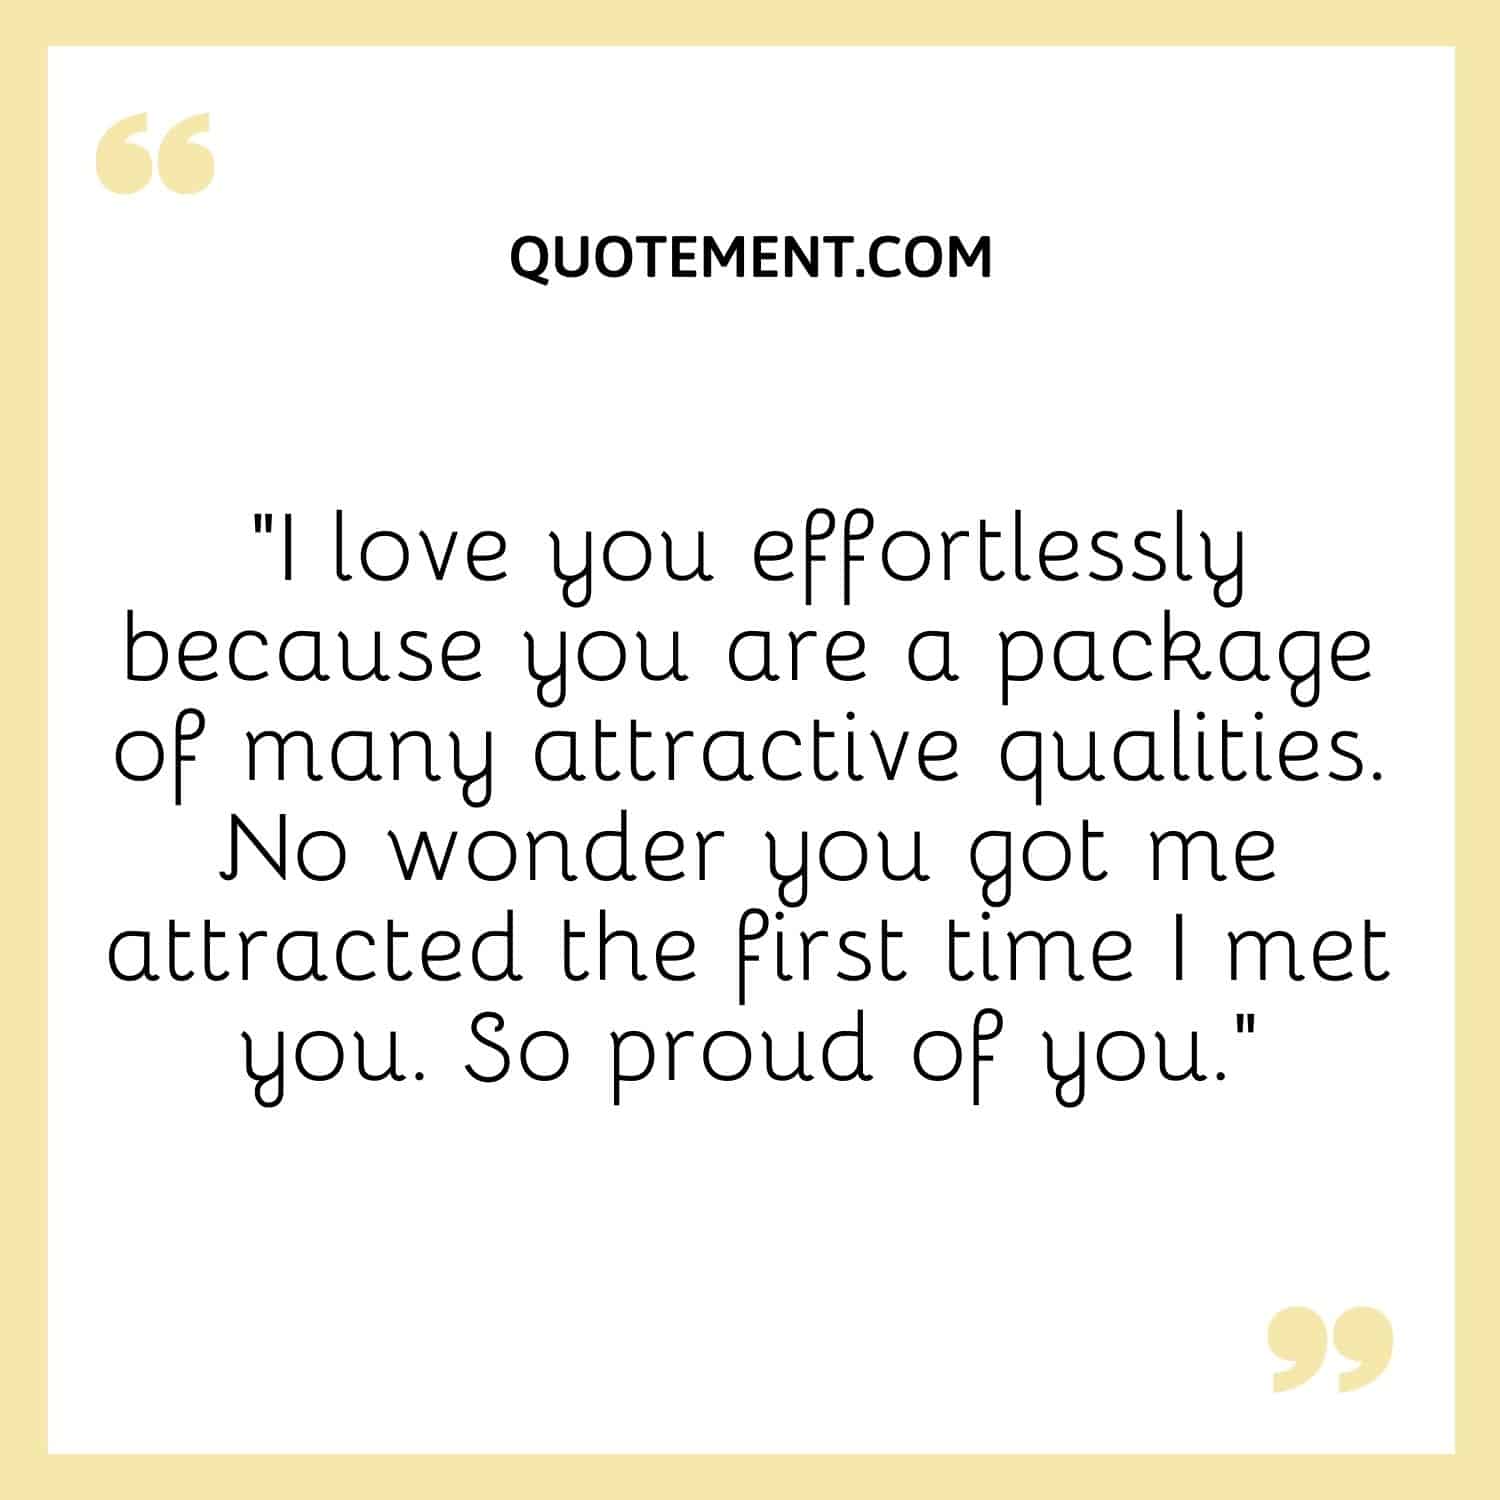 “I love you effortlessly because you are a package of many attractive qualities. No wonder you got me attracted the first time I met you. So proud of you.